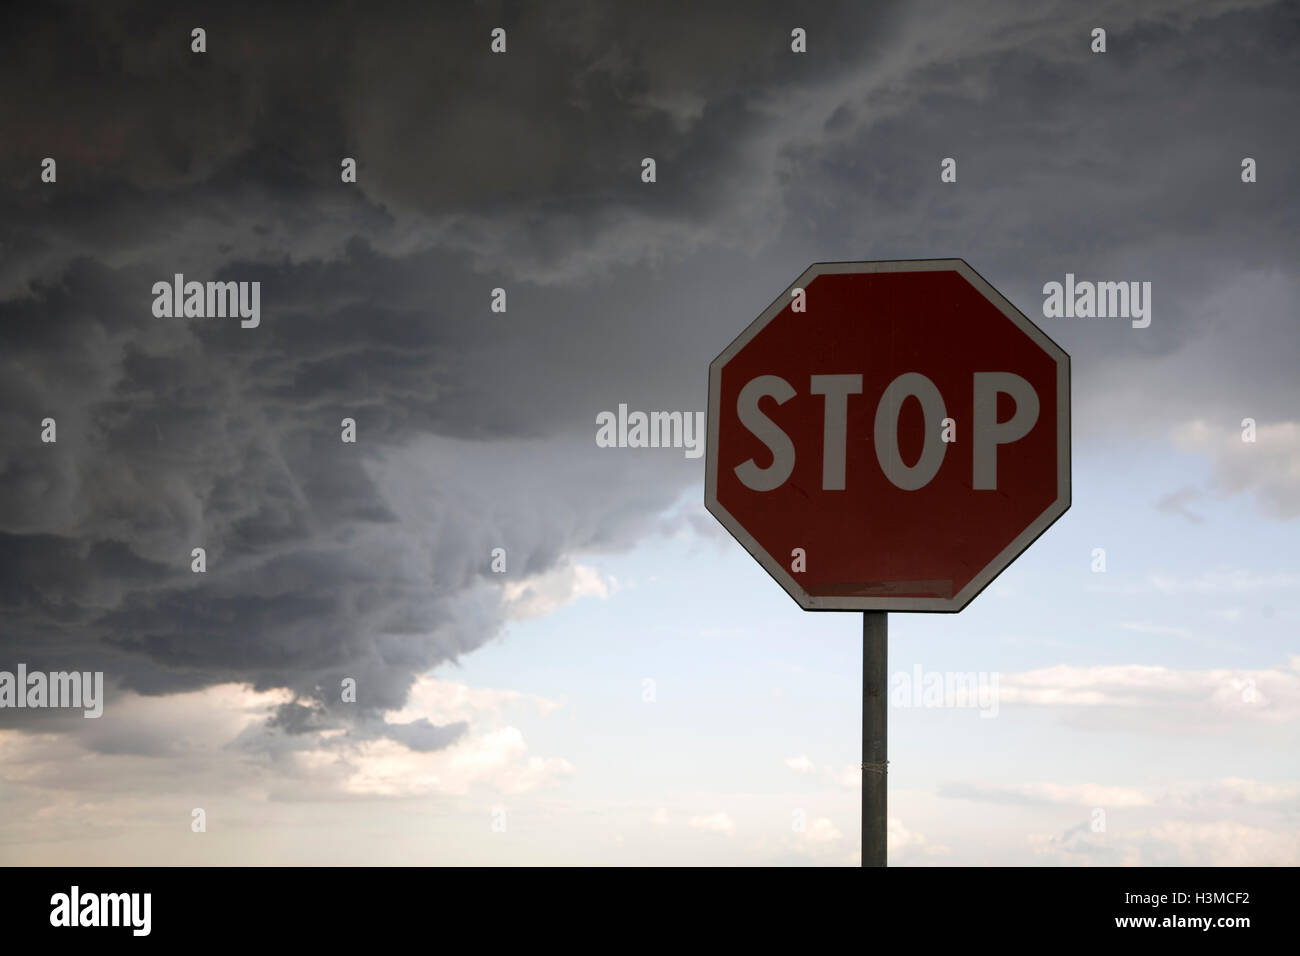 Stop sign on dark cloudy day Stock Photo